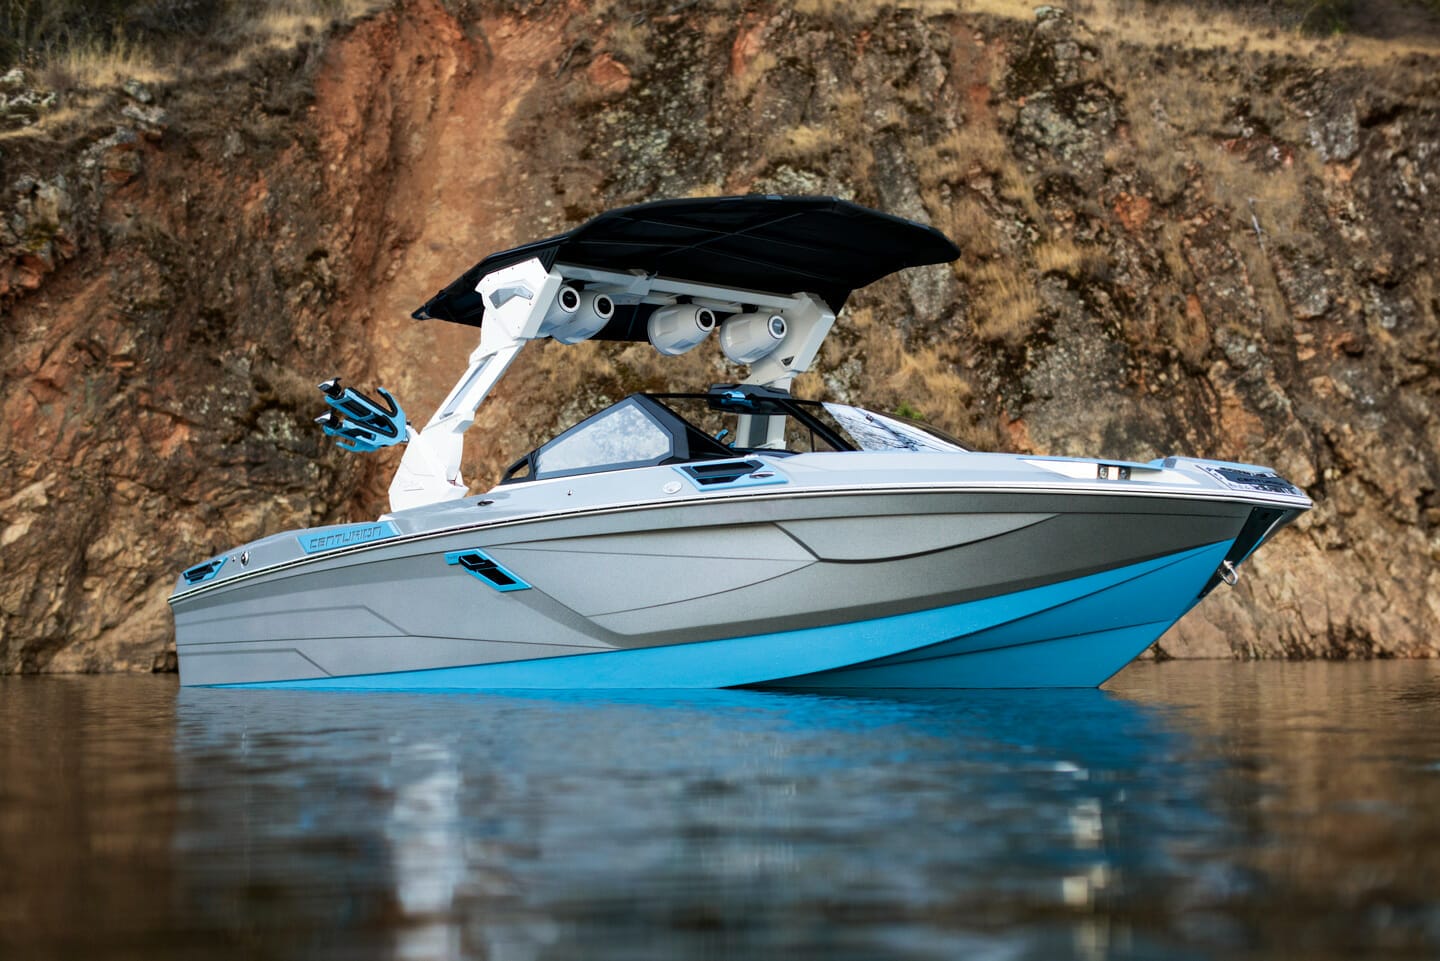 A blue wakeboat on the water near a cliff.